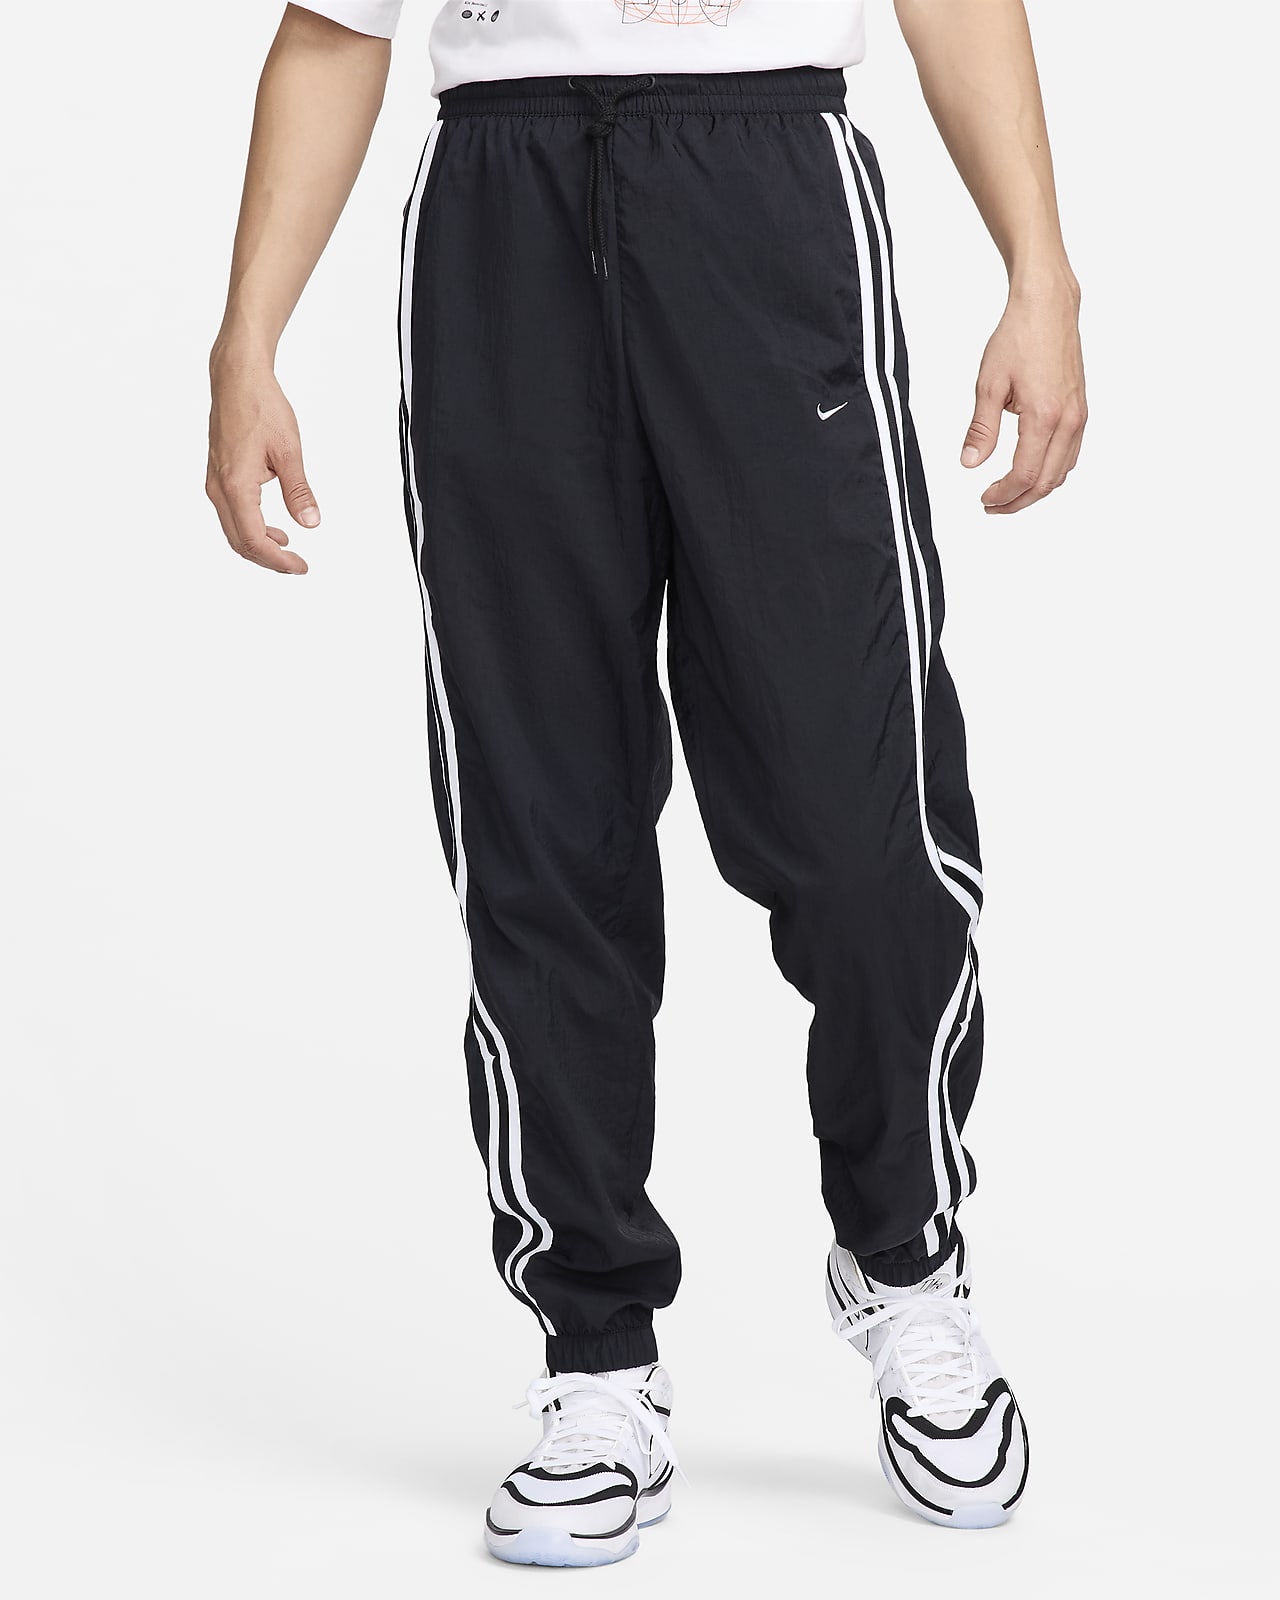 Nike DNA Crossover Men's Dri-FIT Basketball Trousers